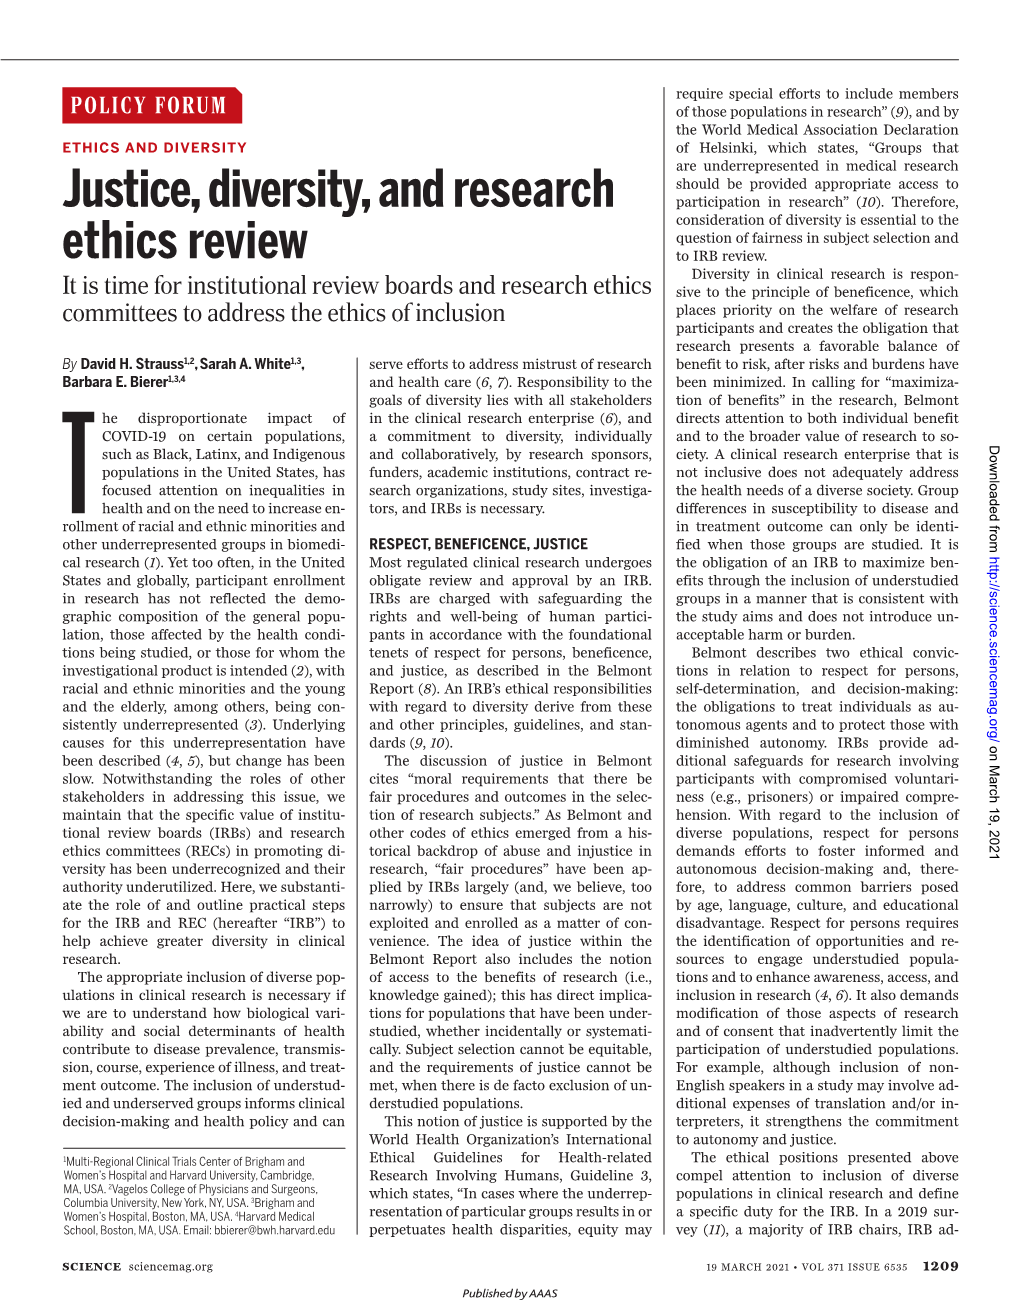 Justice, Diversity, and Research Ethics Review David H